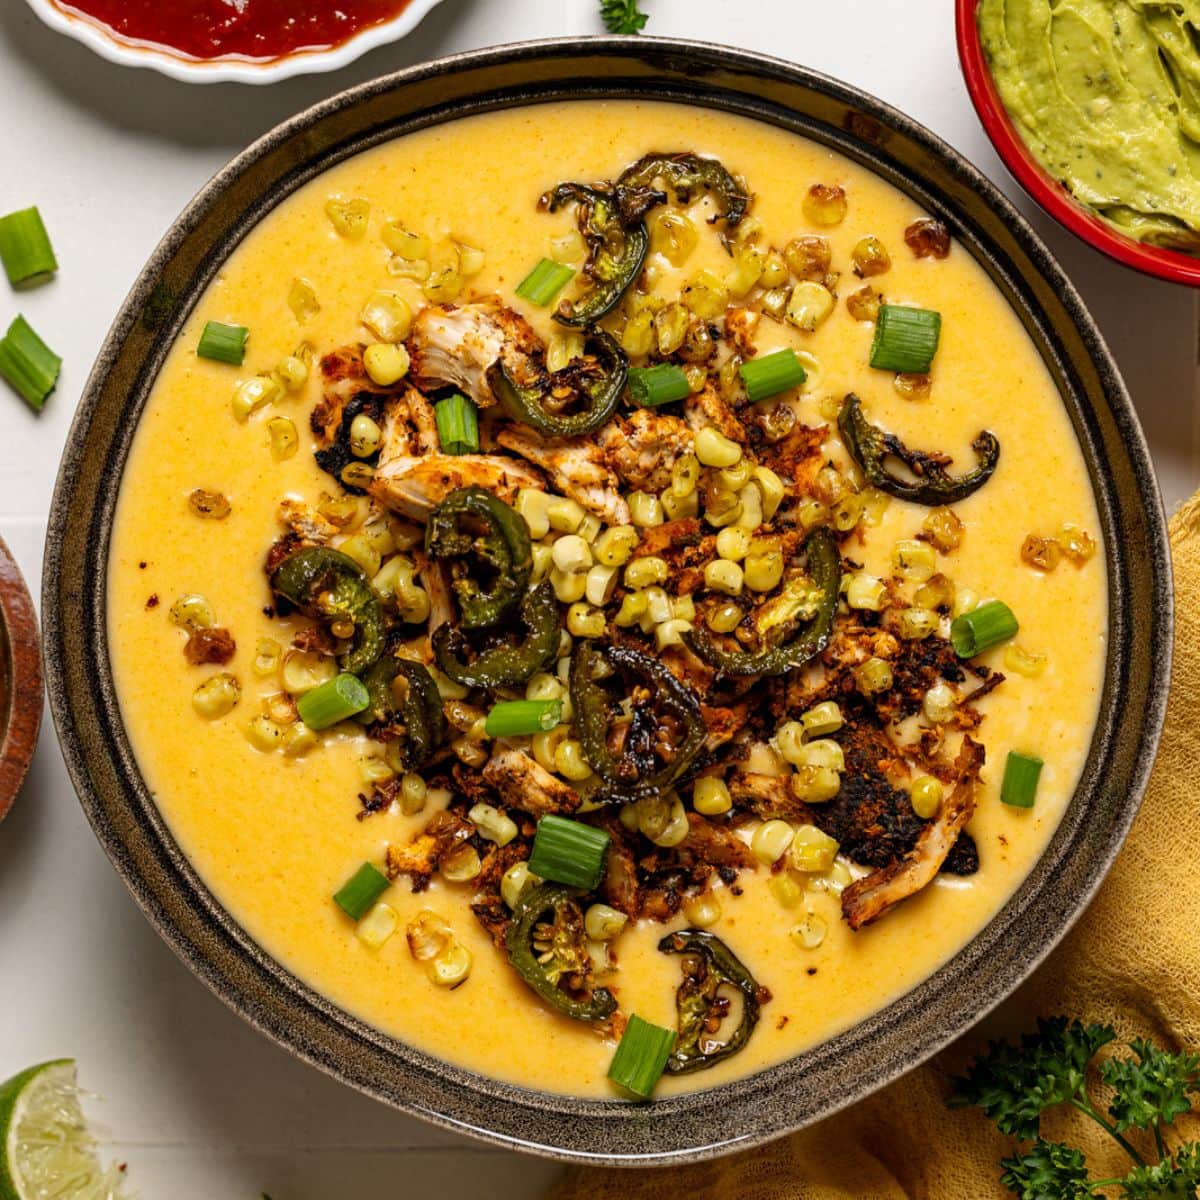 Queso dip with toppings and salsa, guacamole, and lime wedges.